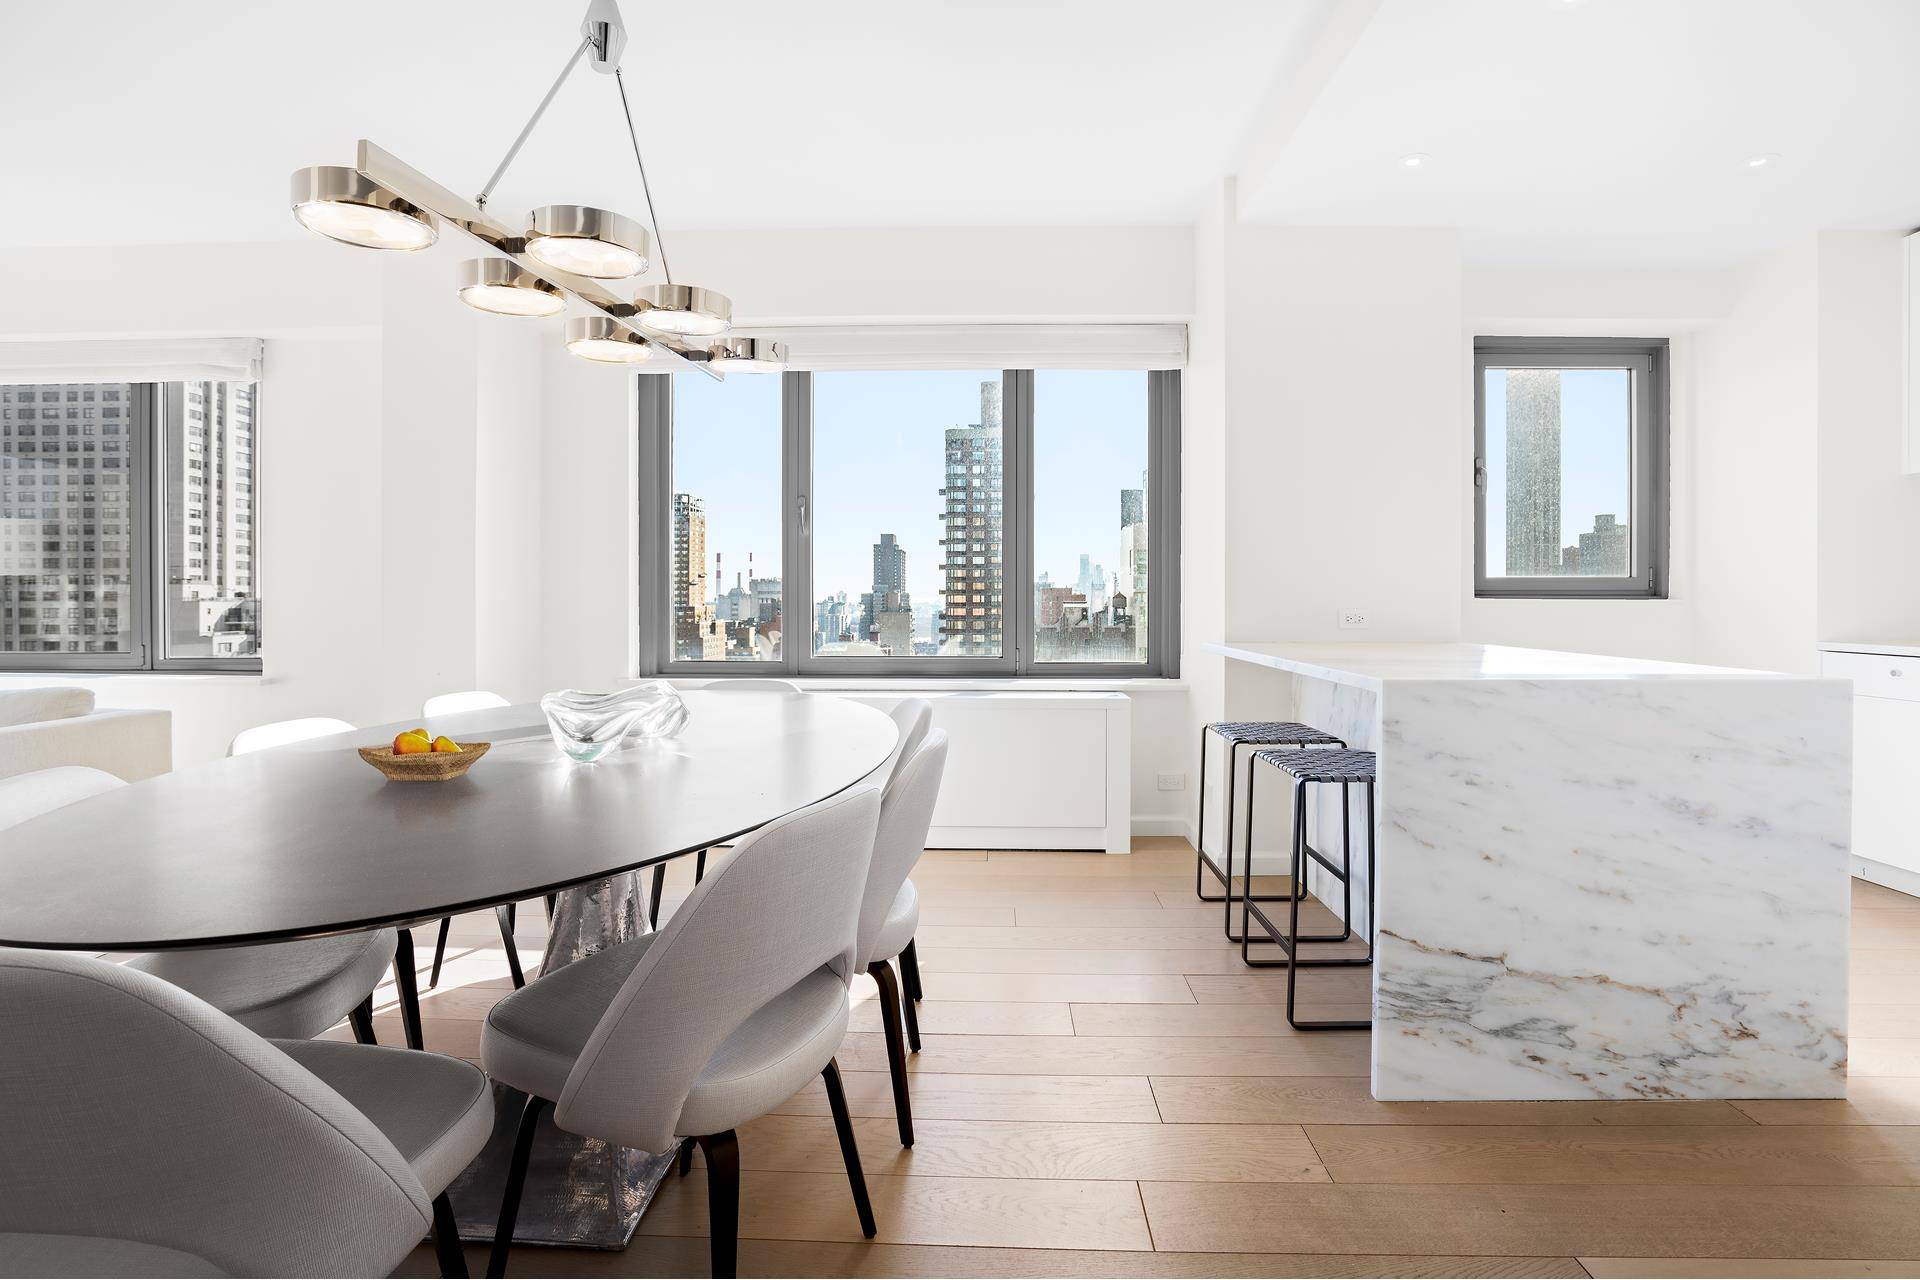 Sweeping views and unparalleled light illuminate this turnkey condominium home in prime Lenox Hill.